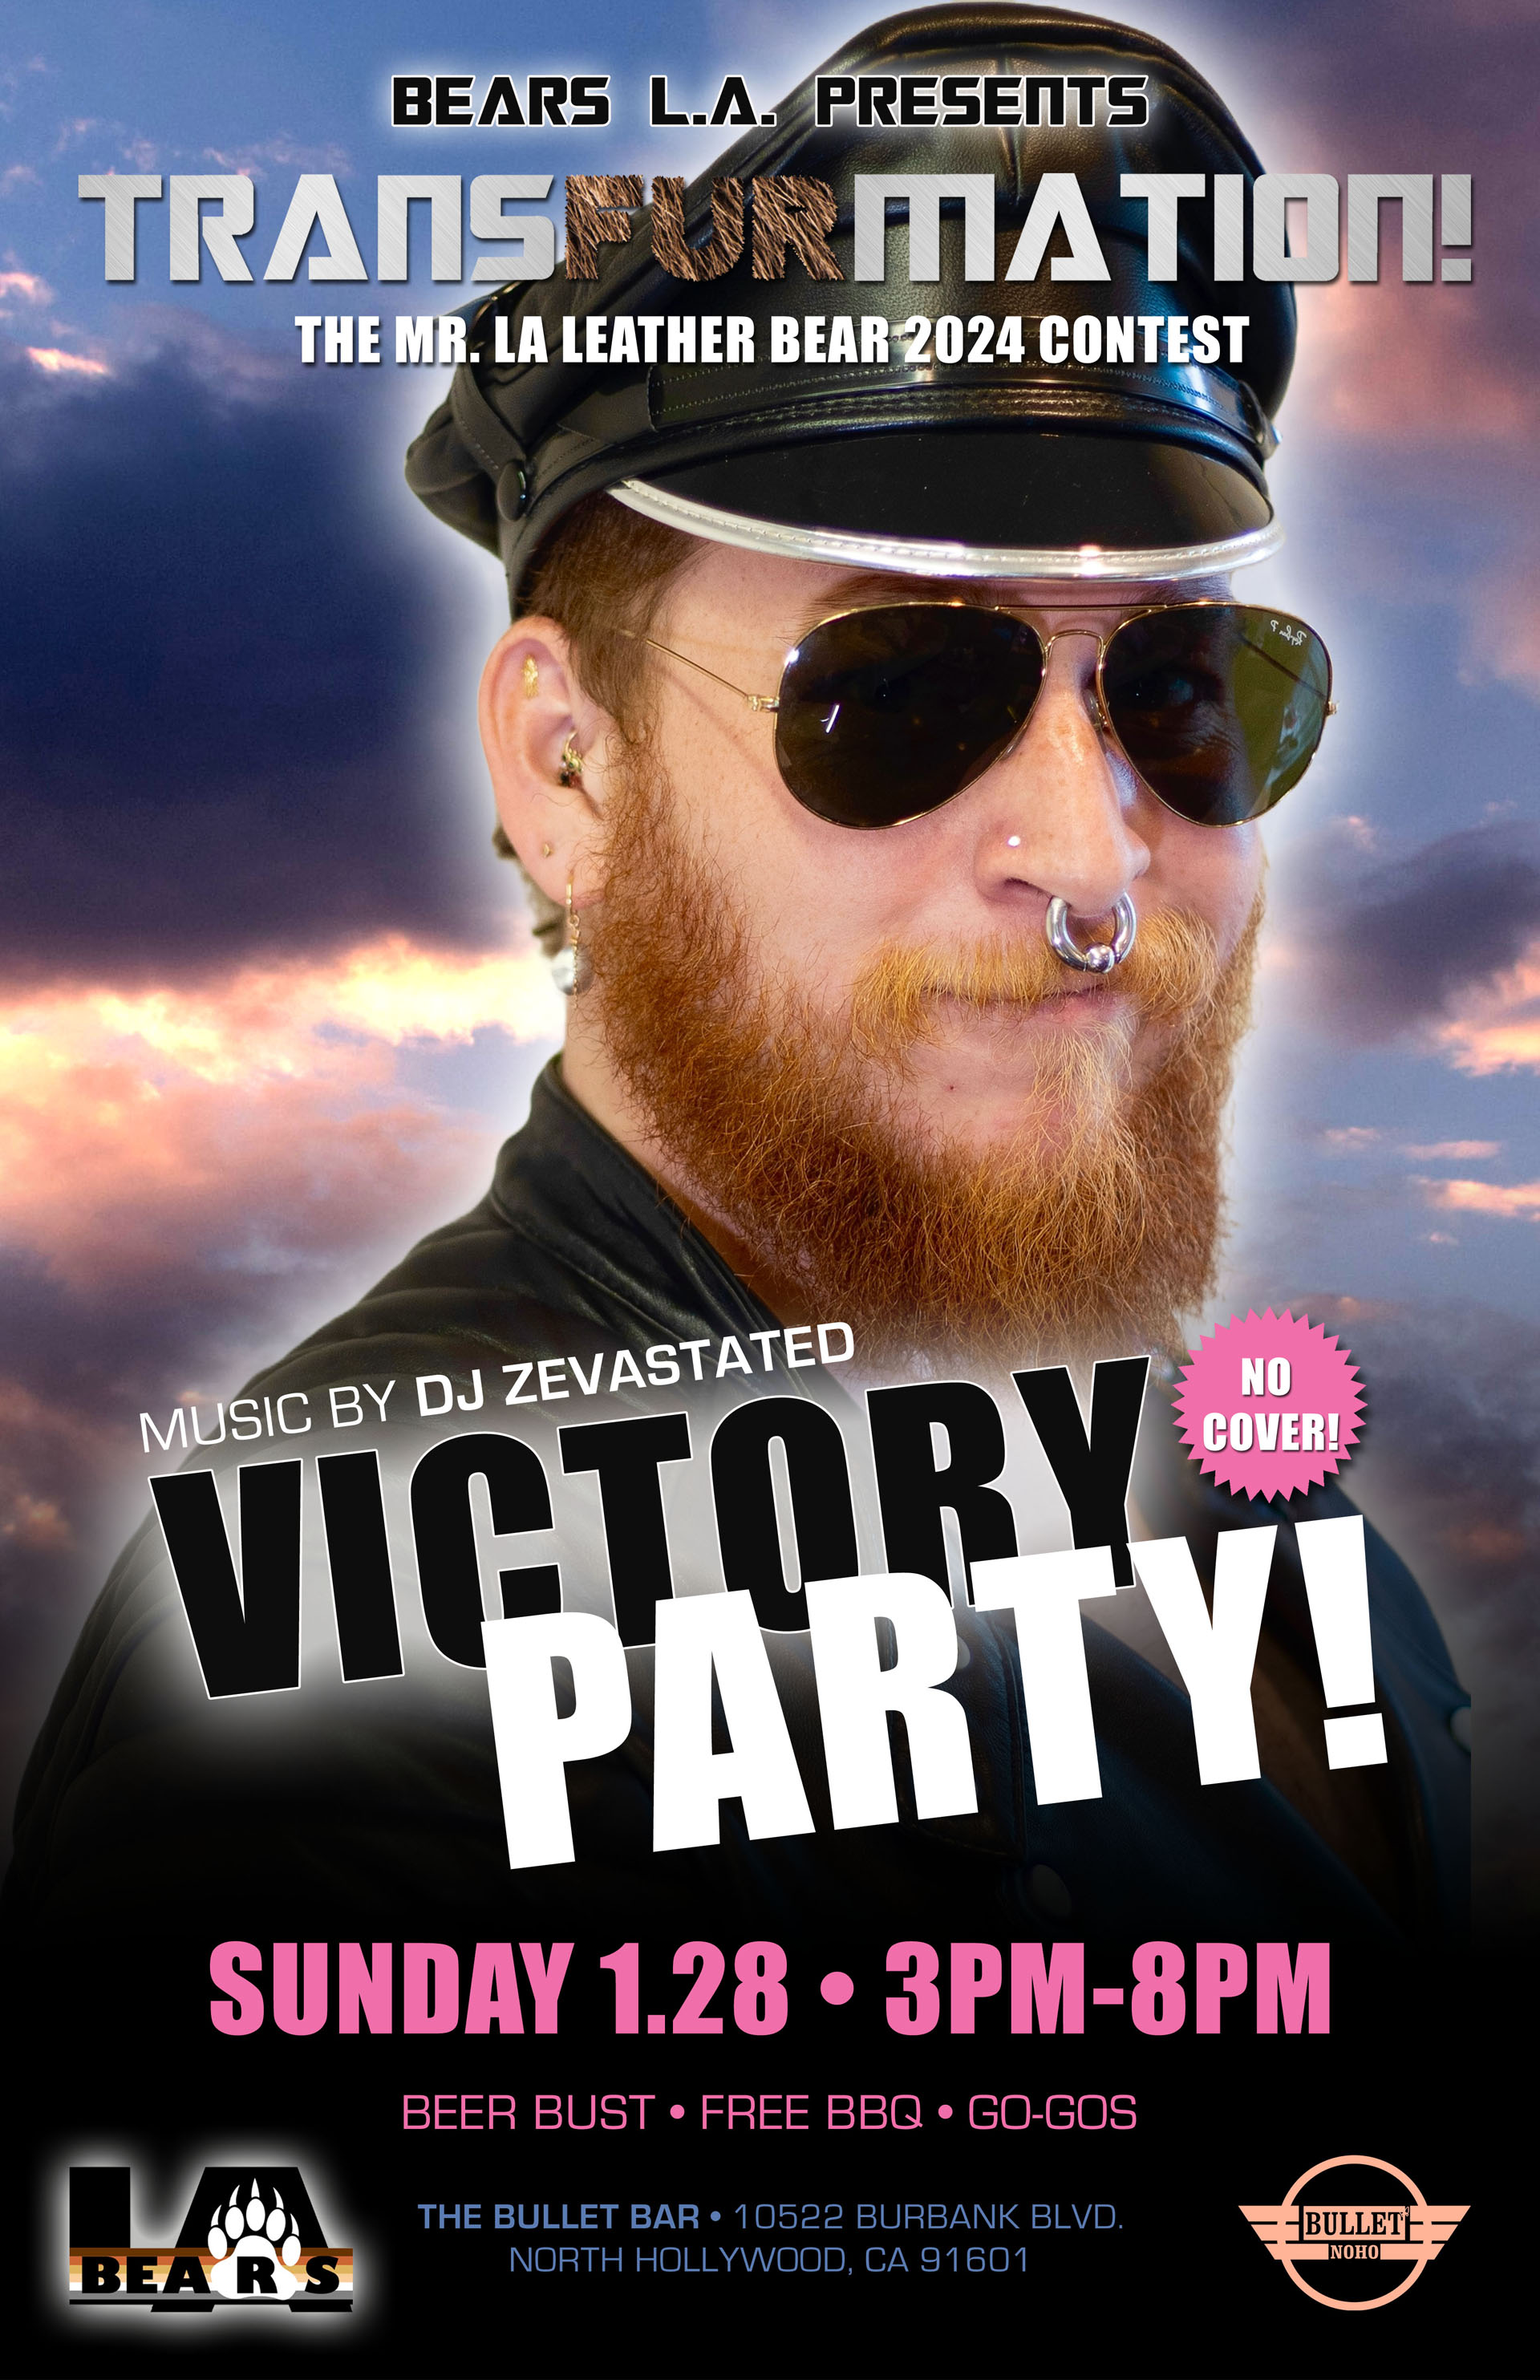 THE BULLET BAR and BEARS L.A. TRANSFURMATION MR. LA LEATHER BEAR 2024 VICTORY PARTY: Sunday, 01/28/24, 3PM-8PM. Featuring DJ ZEVASTATED! Beer Bust! Free BBQ! Go-Gos! NO COVER!